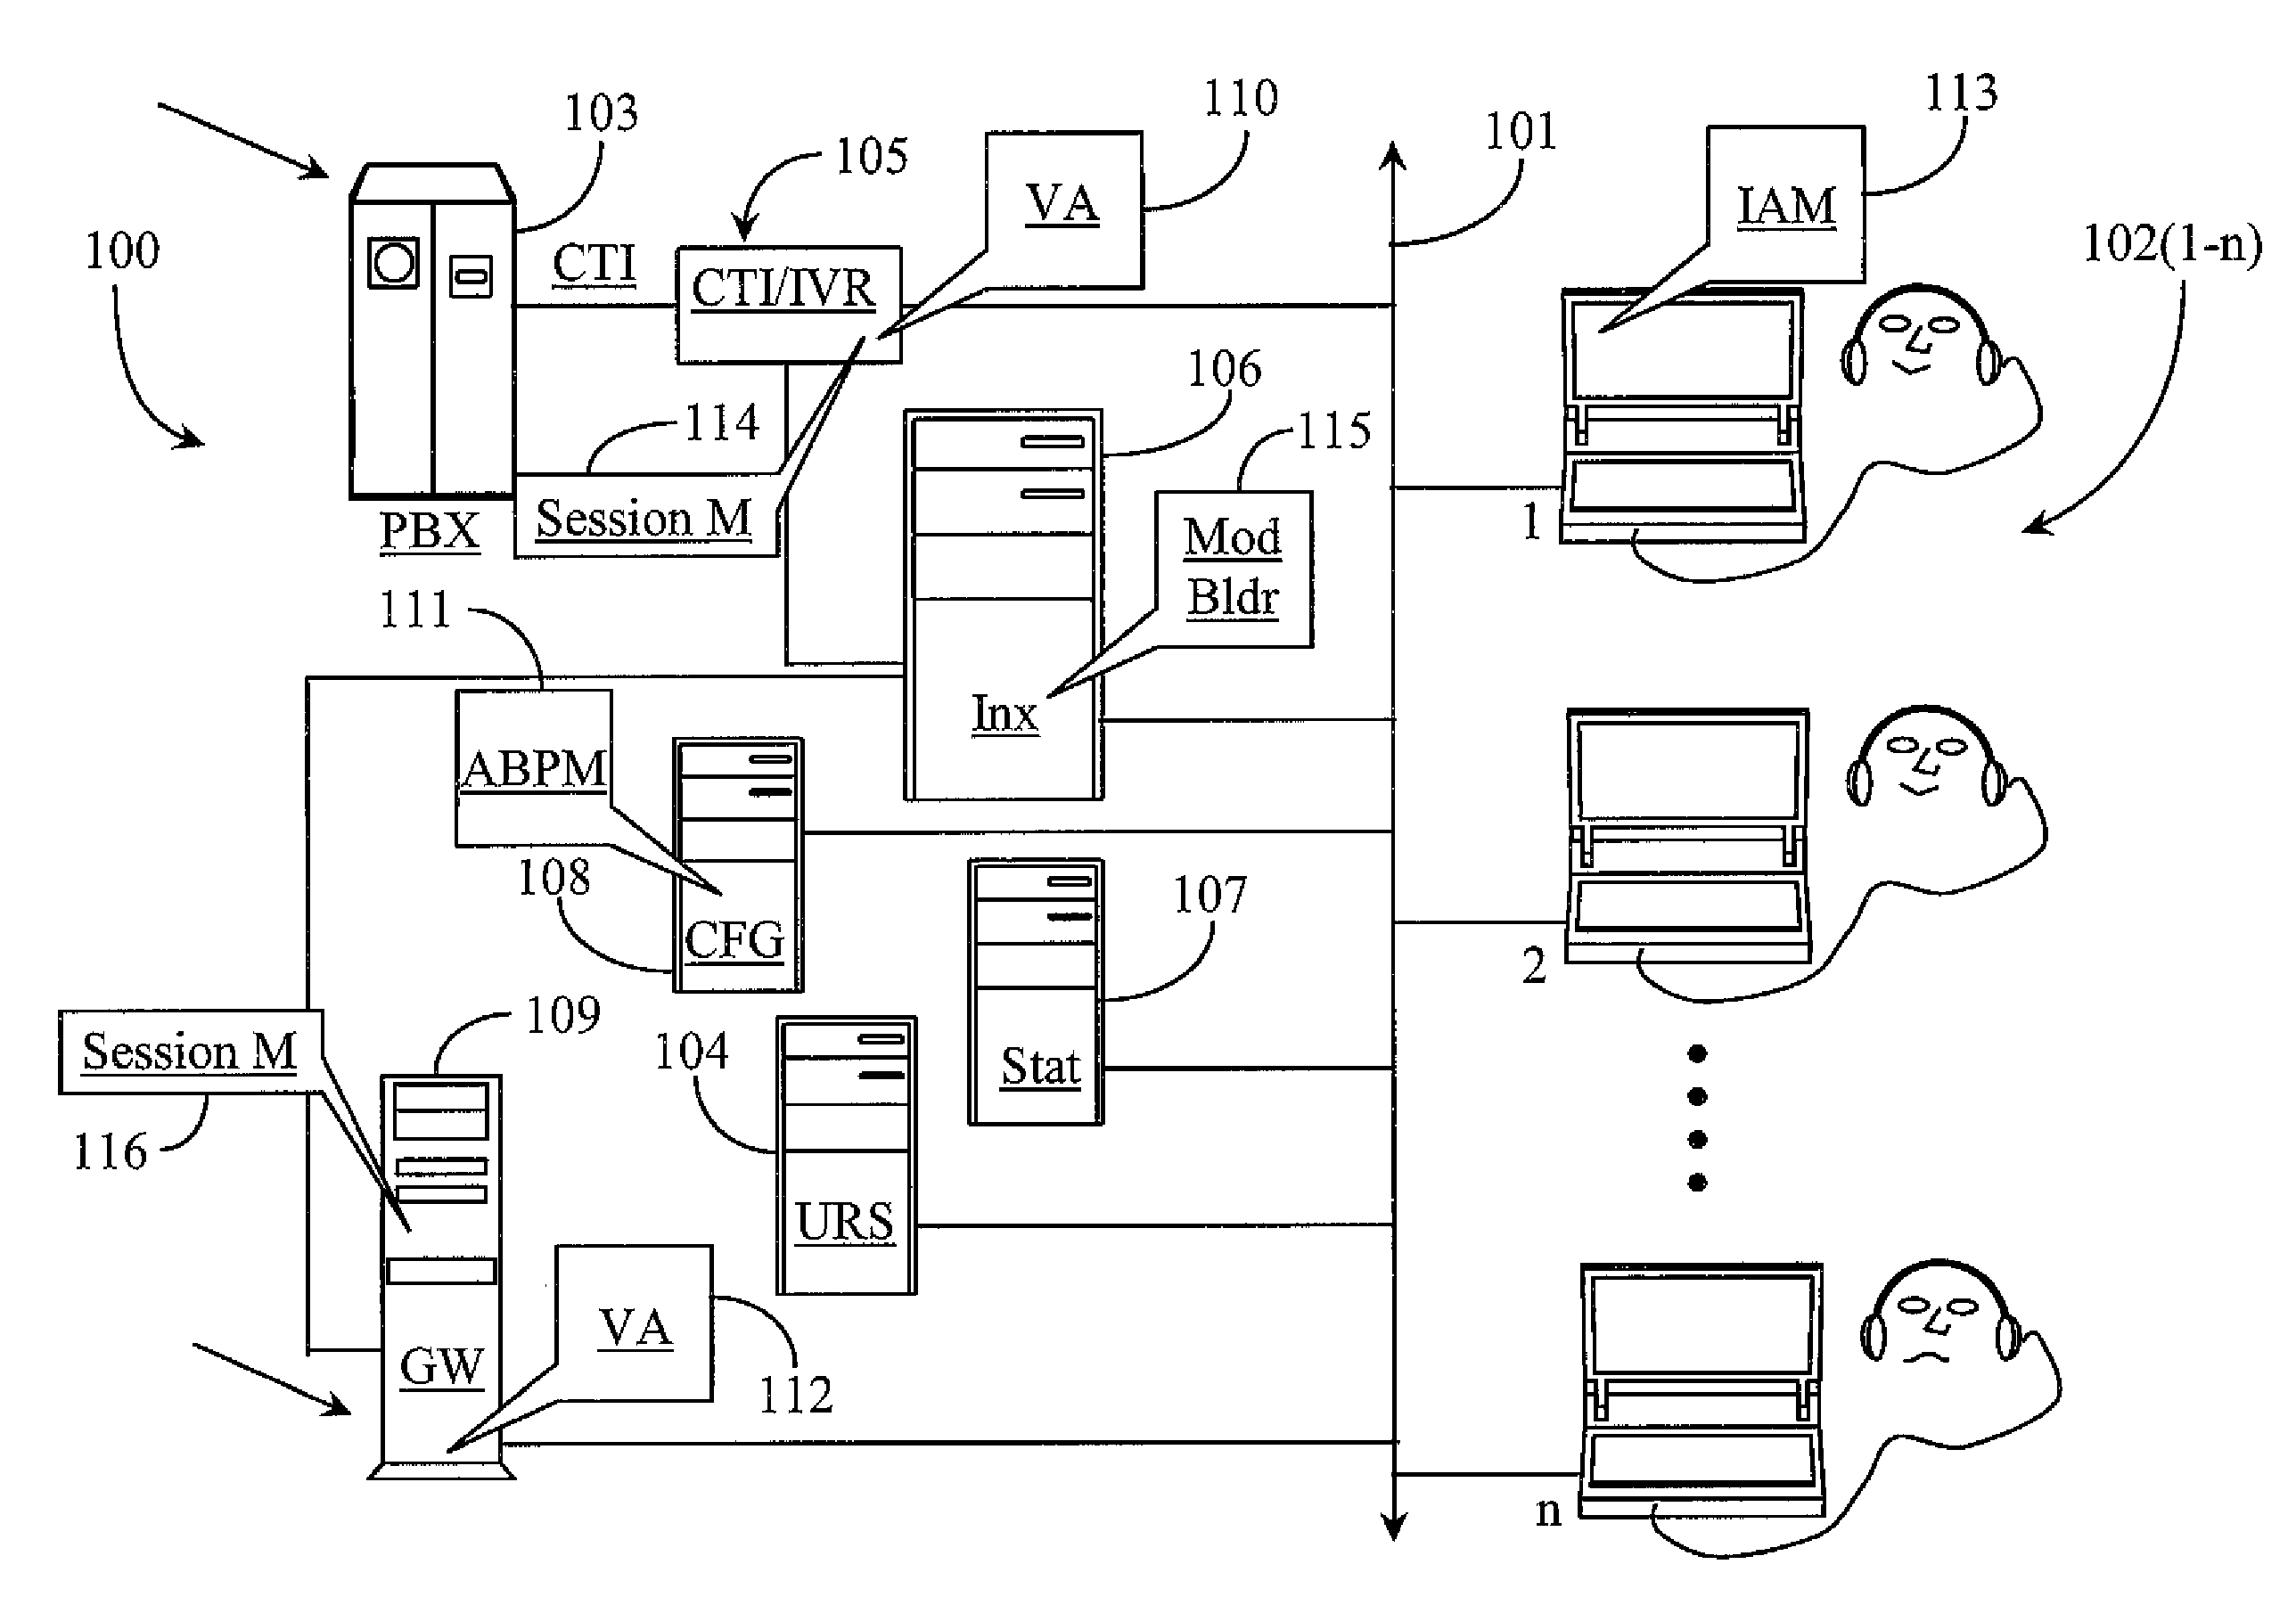 System for Routing Interactions Using Bio-Performance Attributes of Persons as Dynamic Input